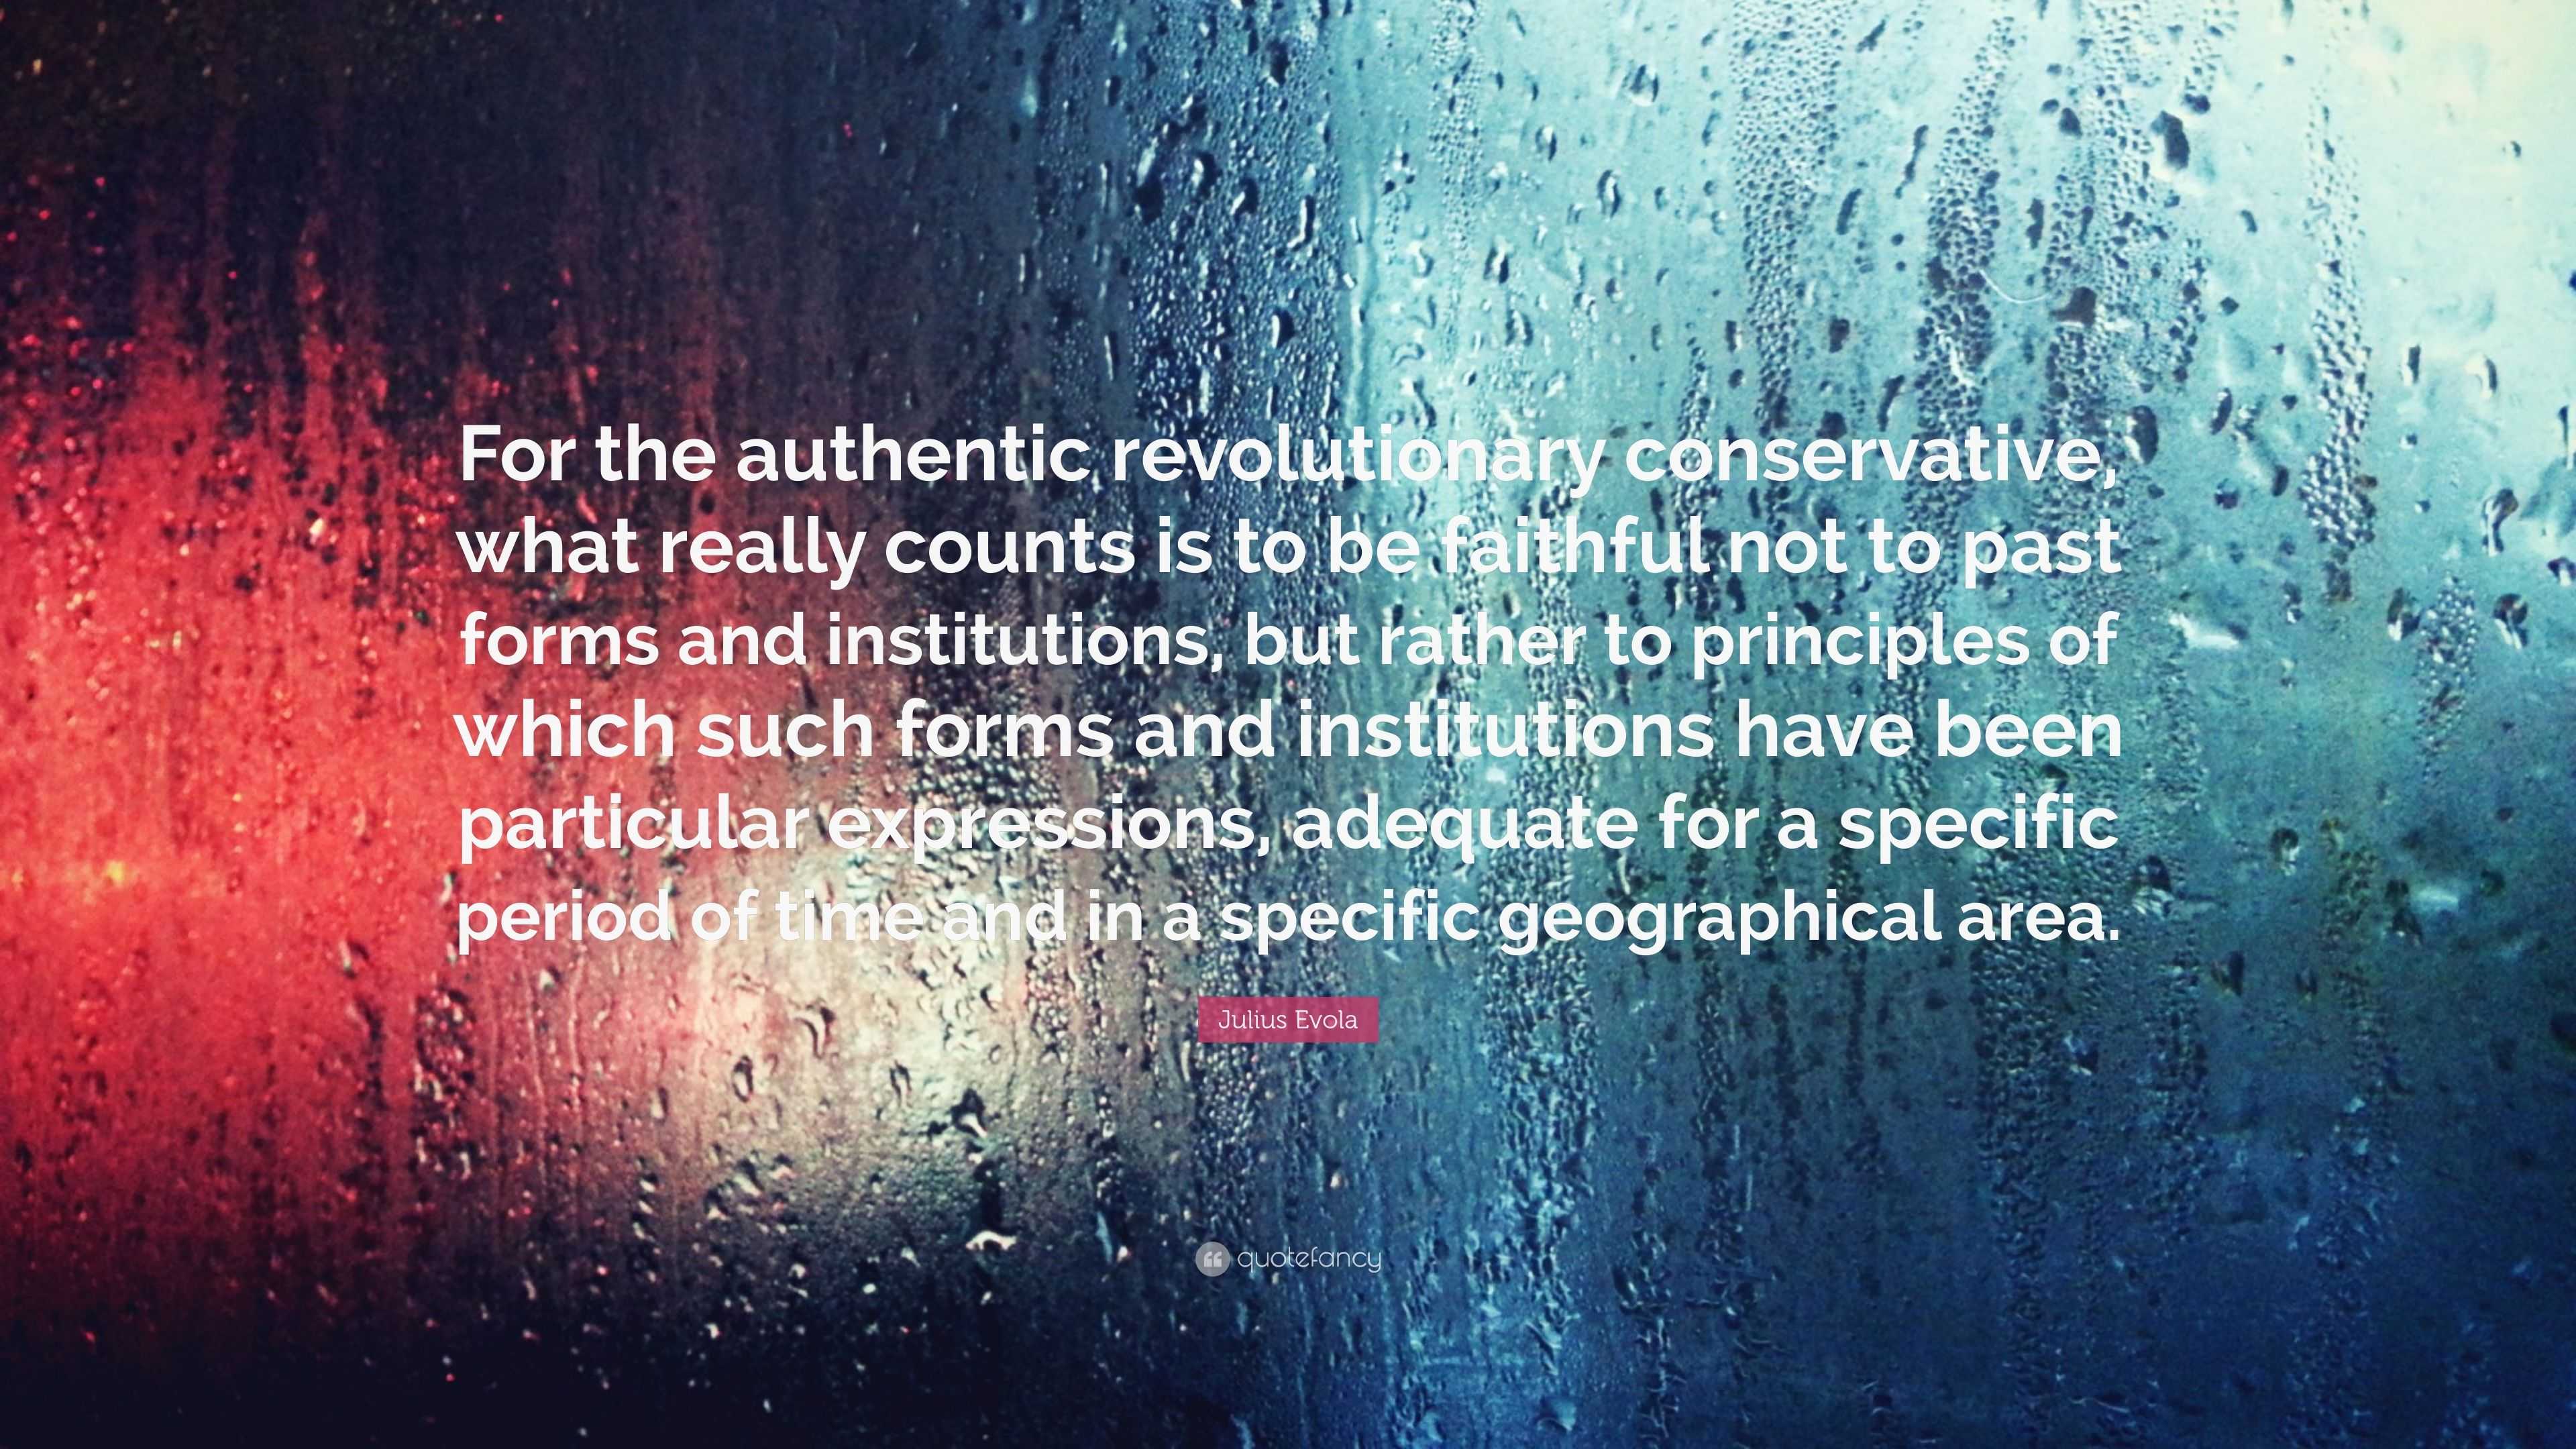 Julius Evola Quote: "For the authentic revolutionary conservative, what really counts is to be ...